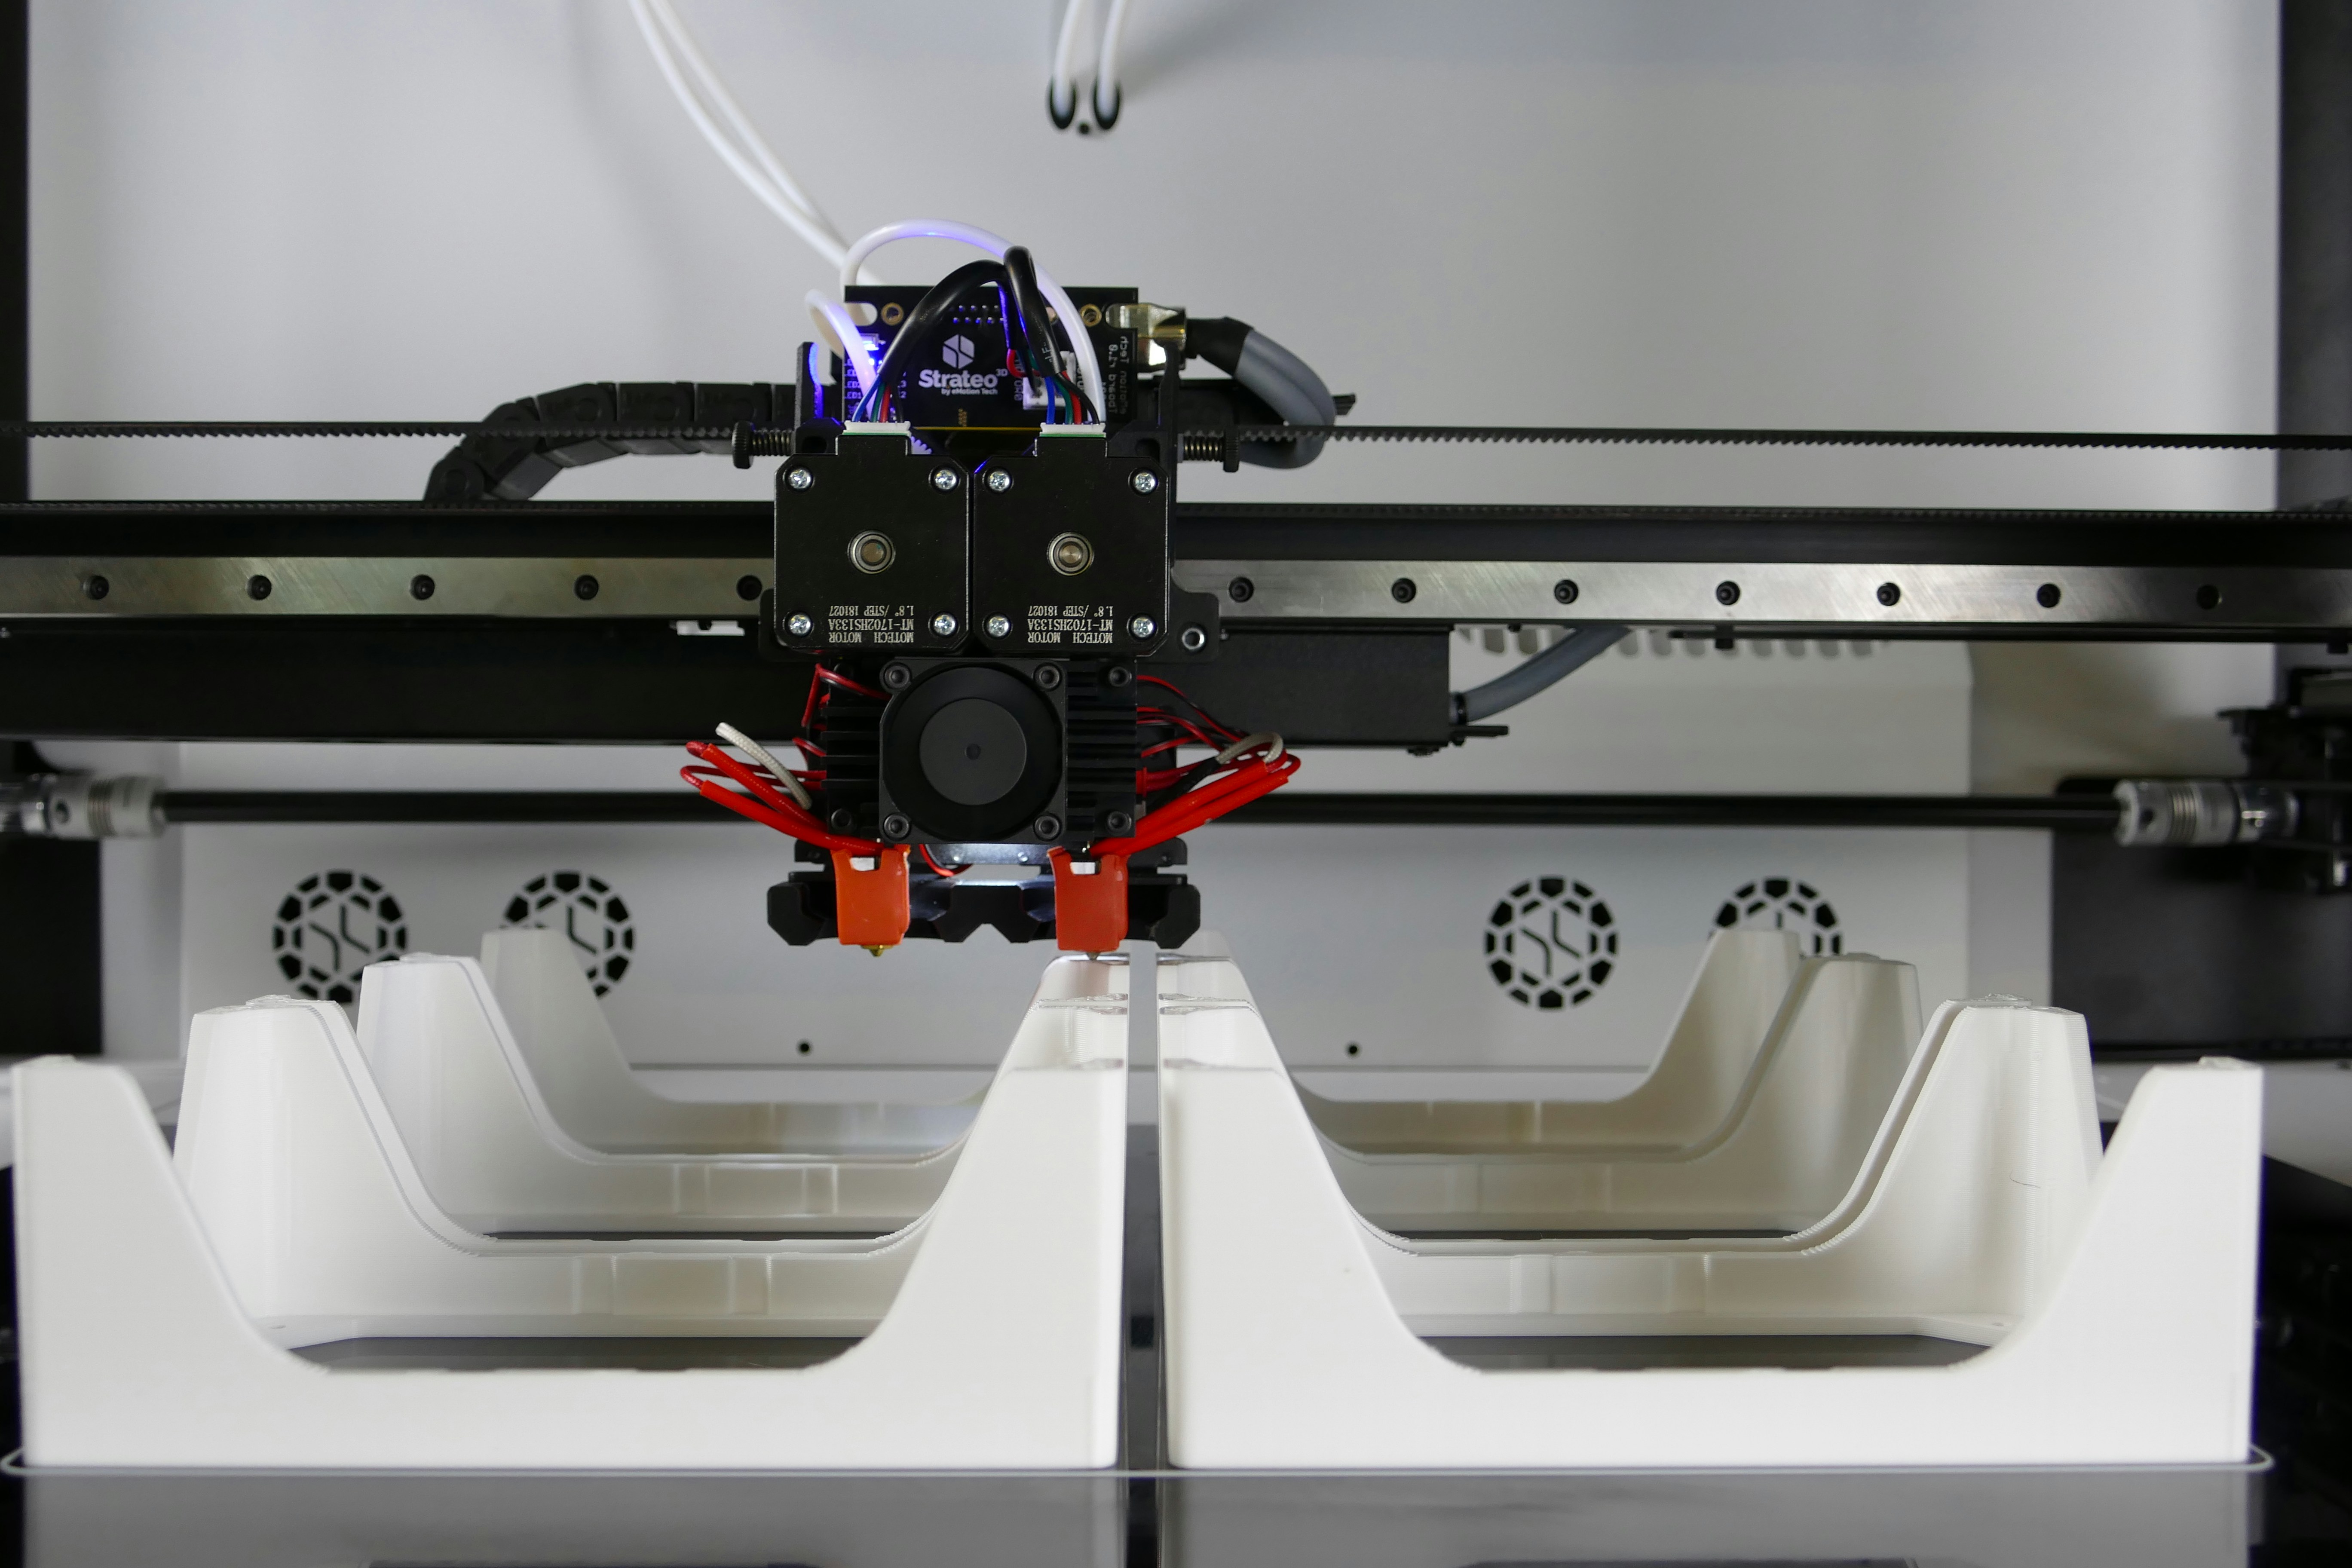 3D printer to create a three-dimensional object using additive manufacturing technology